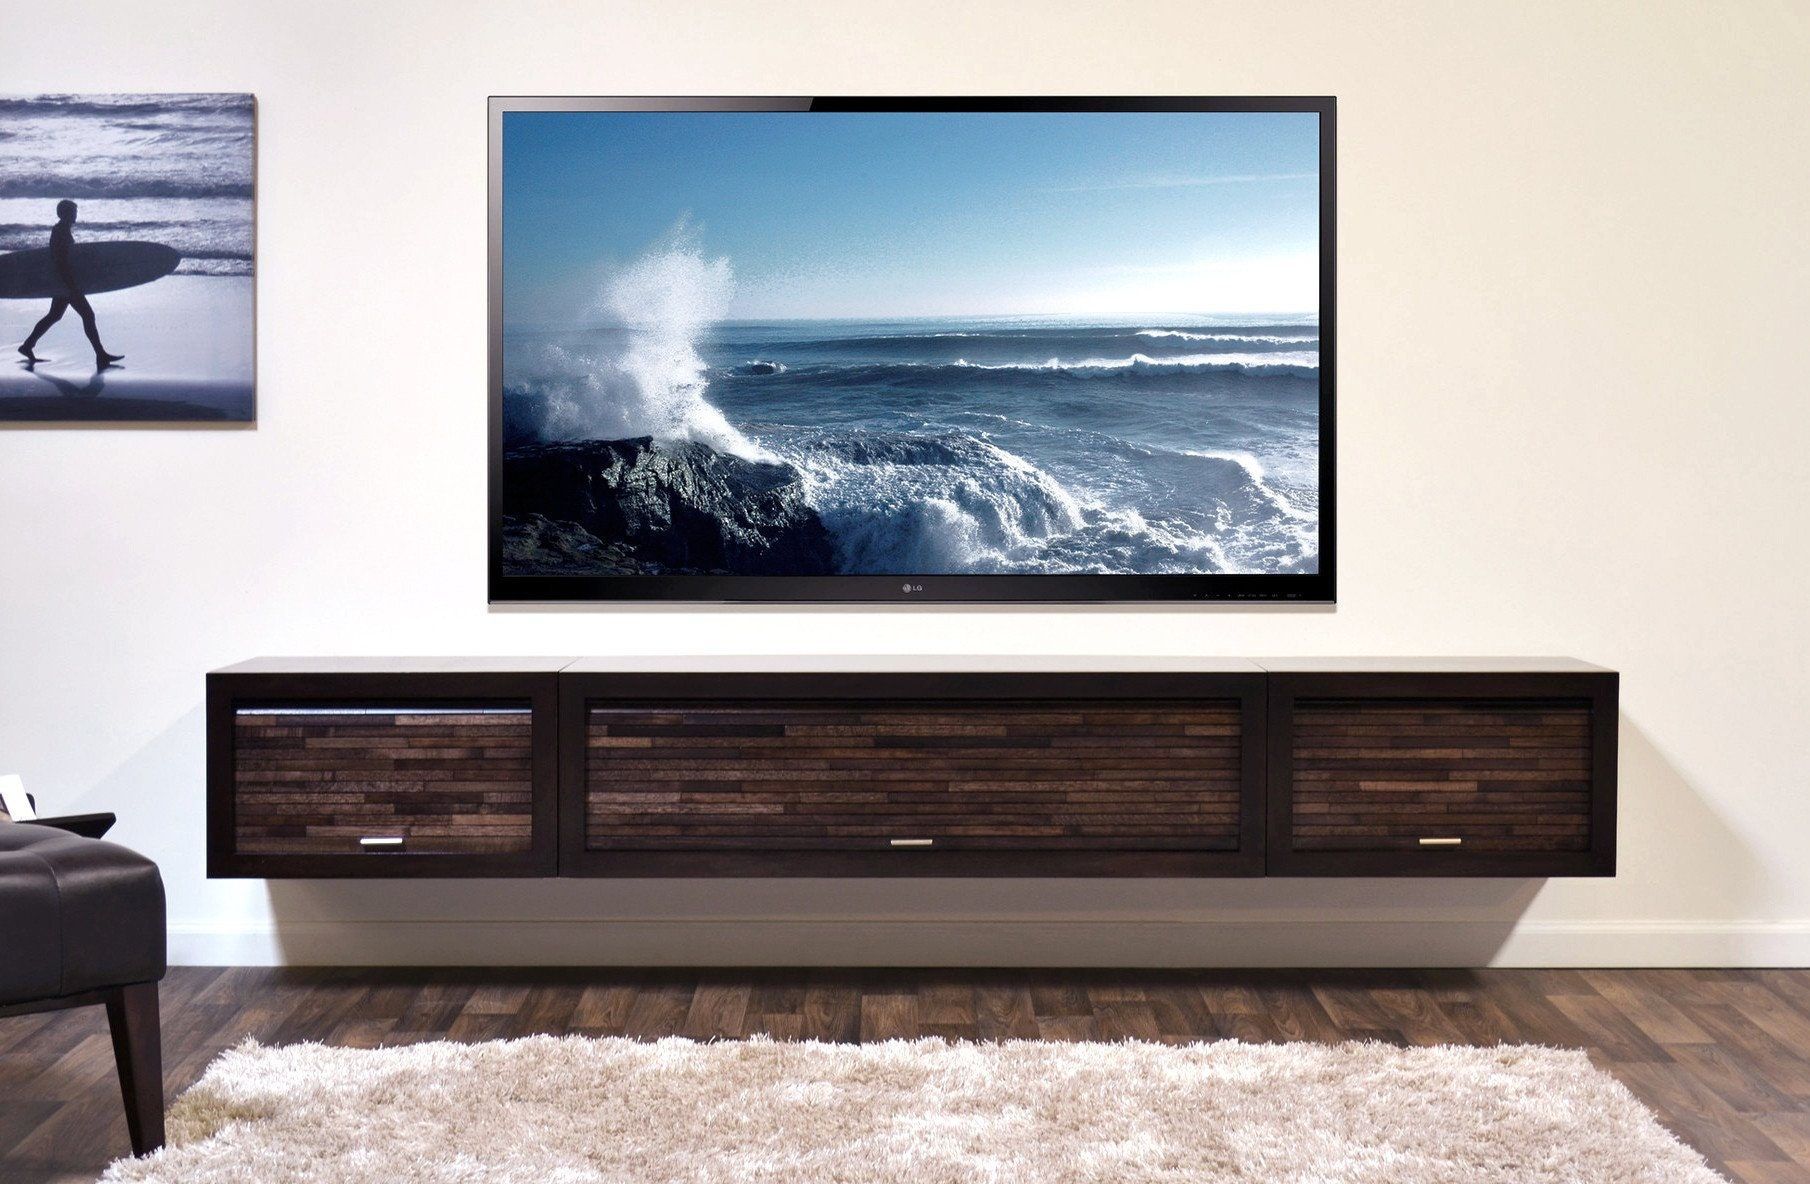 Wall Mount Entertainment Center Eco Geo Espresso – Etsy Regarding Wall Mounted Floating Tv Stands (View 15 of 15)